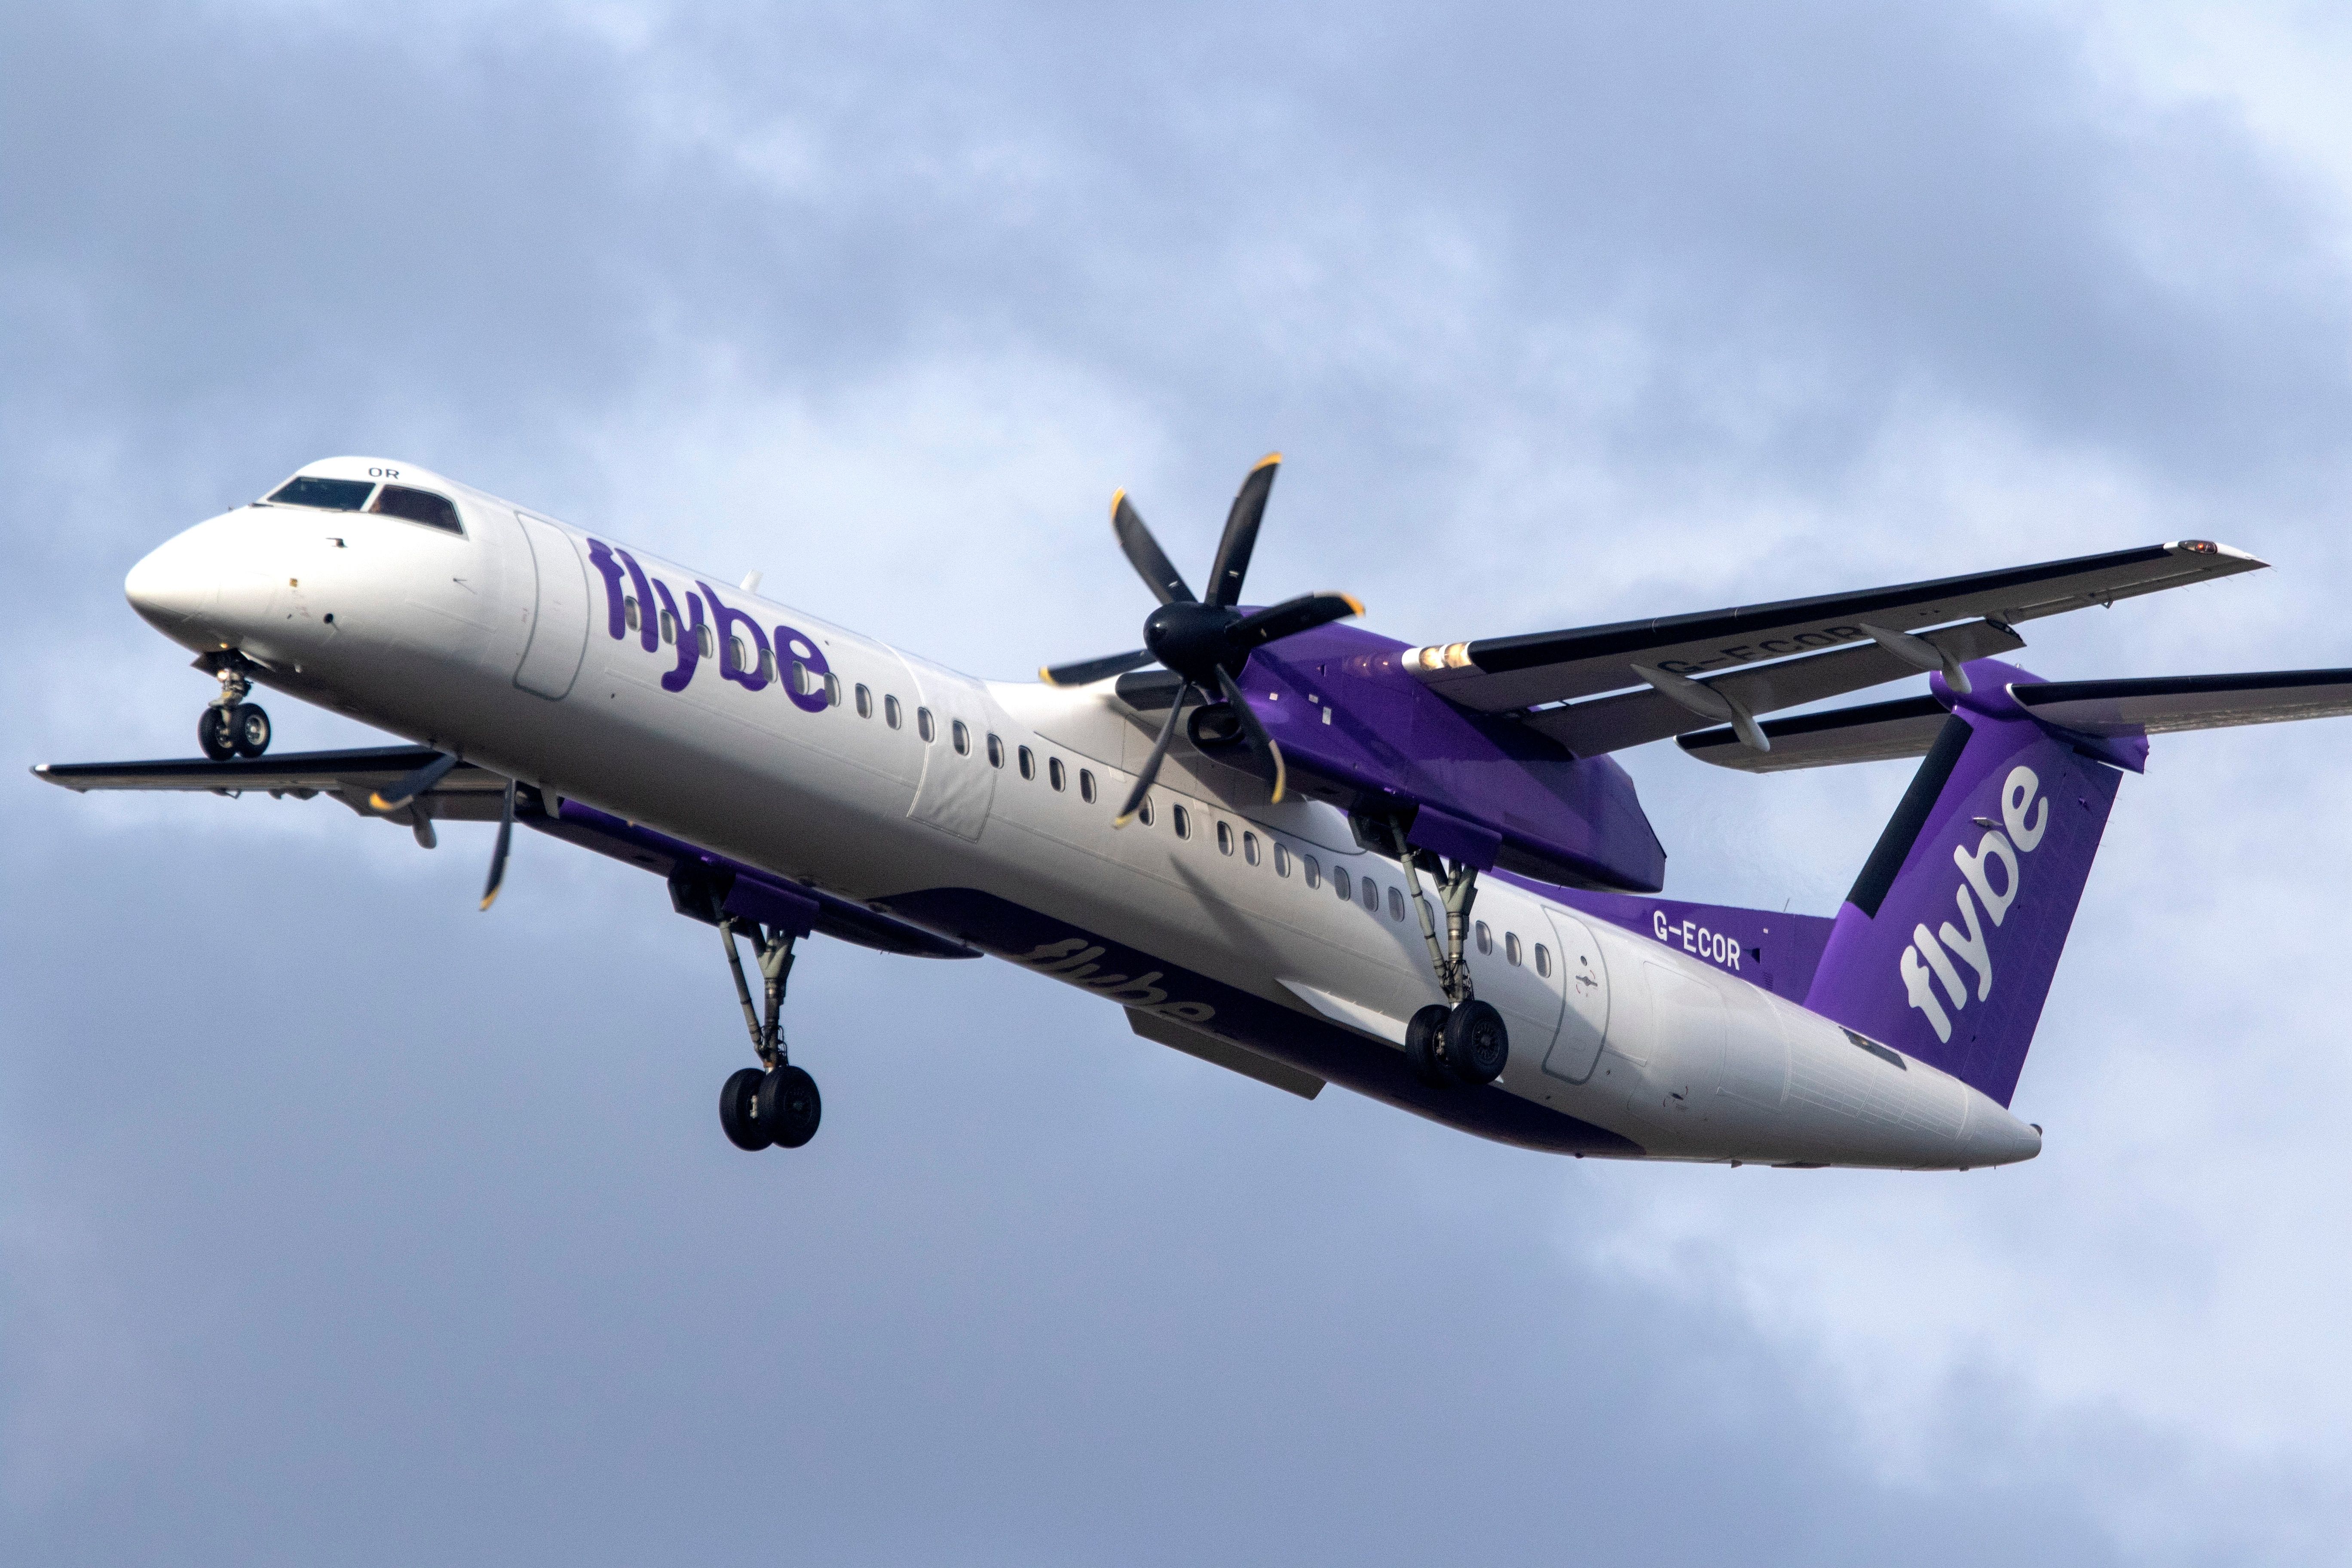 Flybe Bombardier DHC-8-400 (G-ECOR) landing at Amsterdam Schiphol Airport